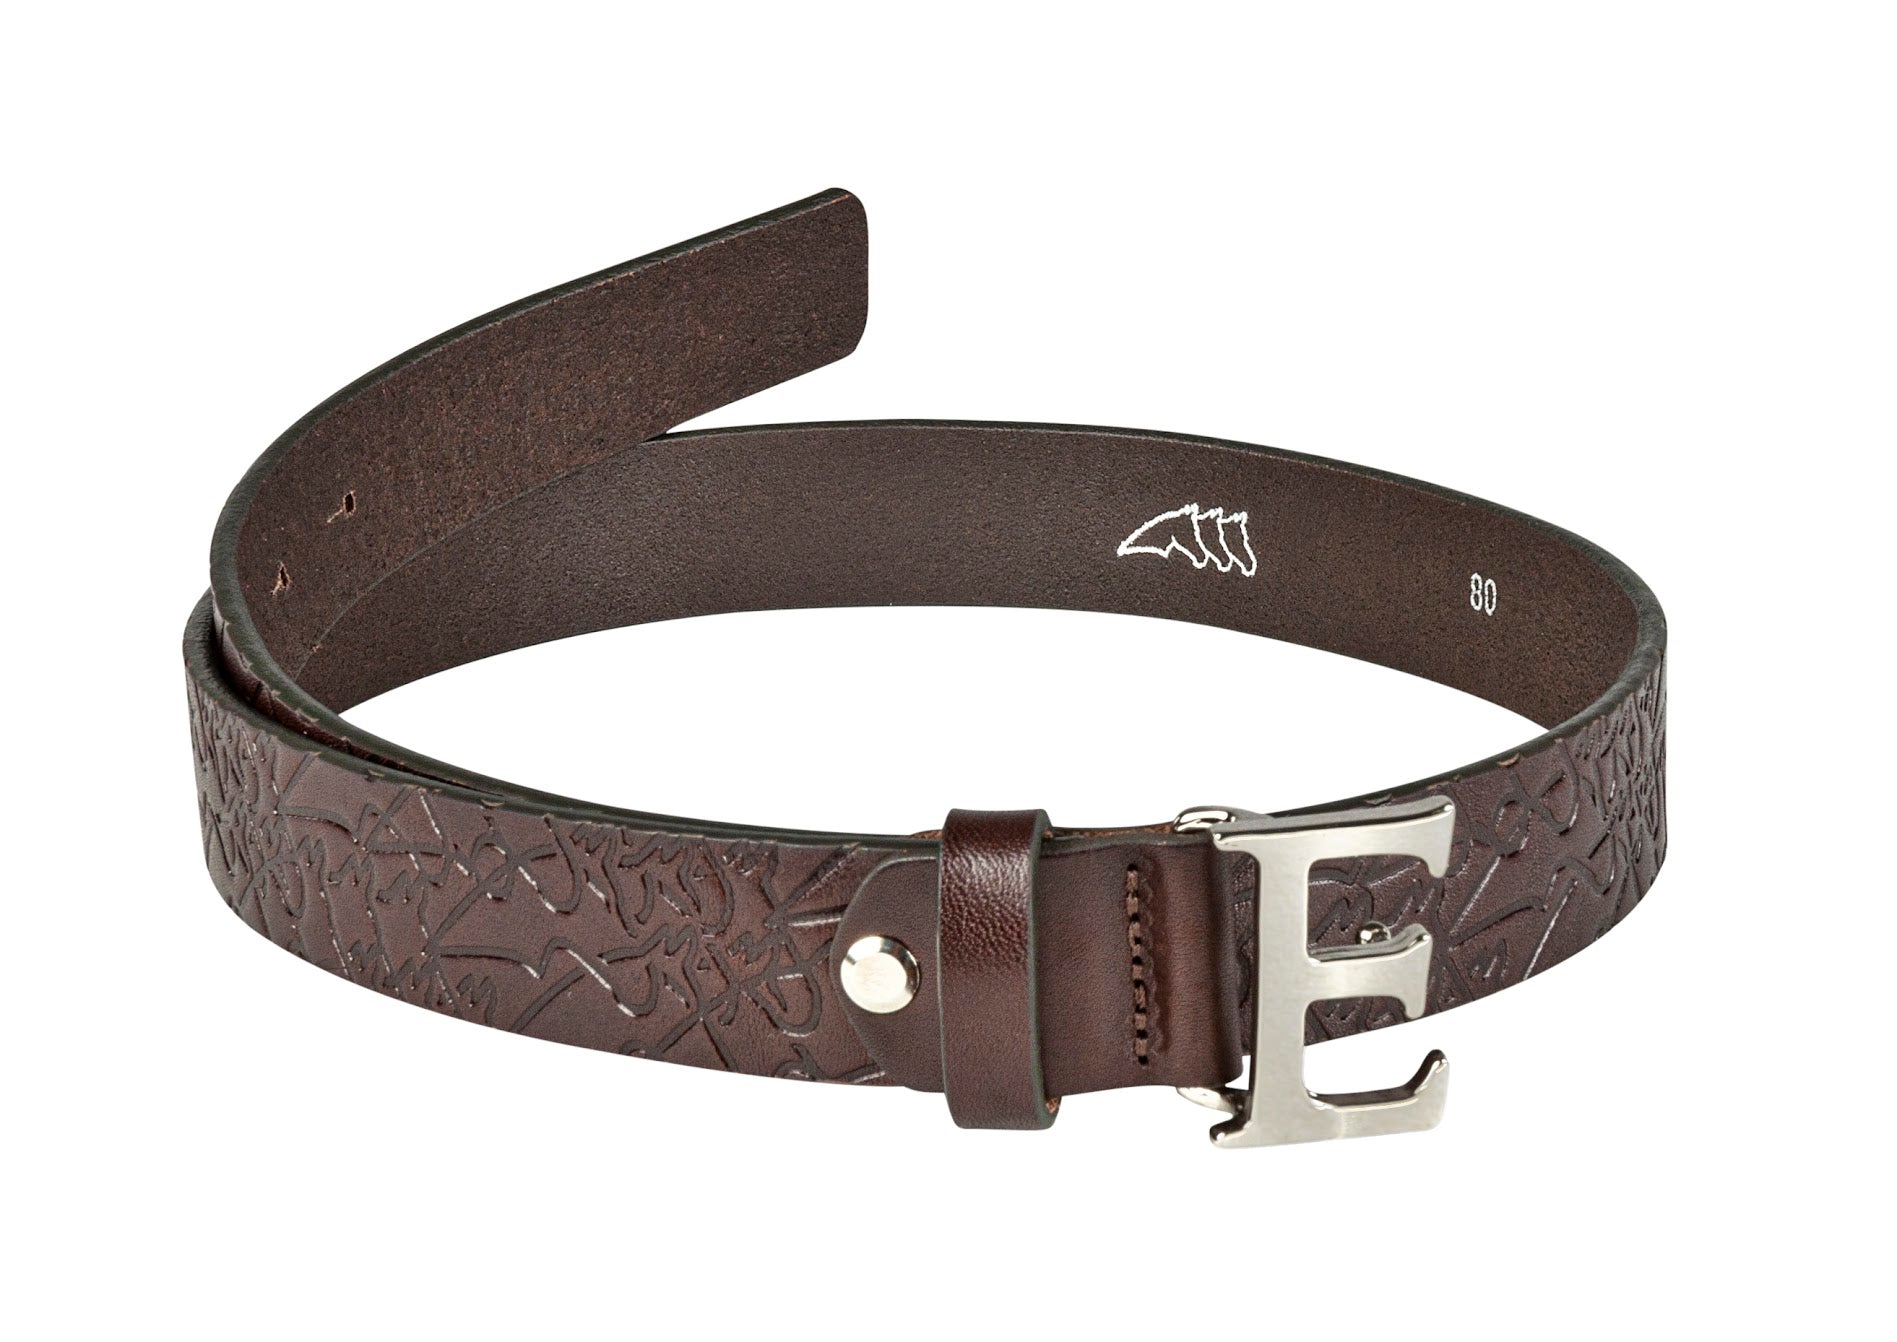 The Equiline Embossed leather belt is made from from a high quality leather. Finished with a silver Equiline ‘E’ buckle and the 3 horse logo embossed all over.